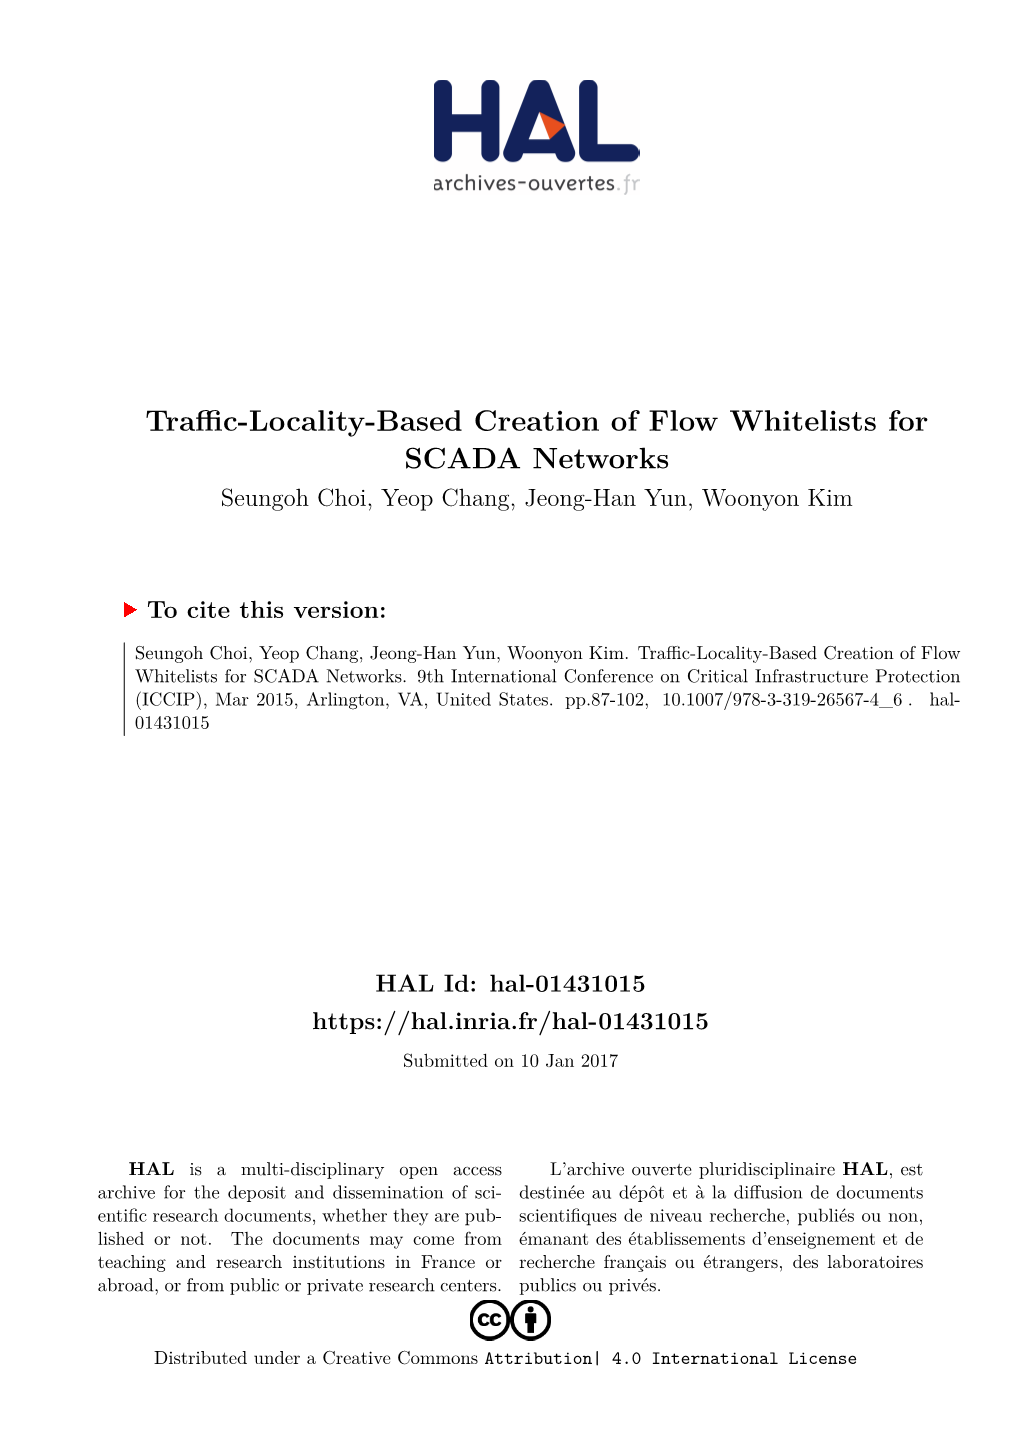 Traffic-Locality-Based Creation of Flow Whitelists for Scada Networks